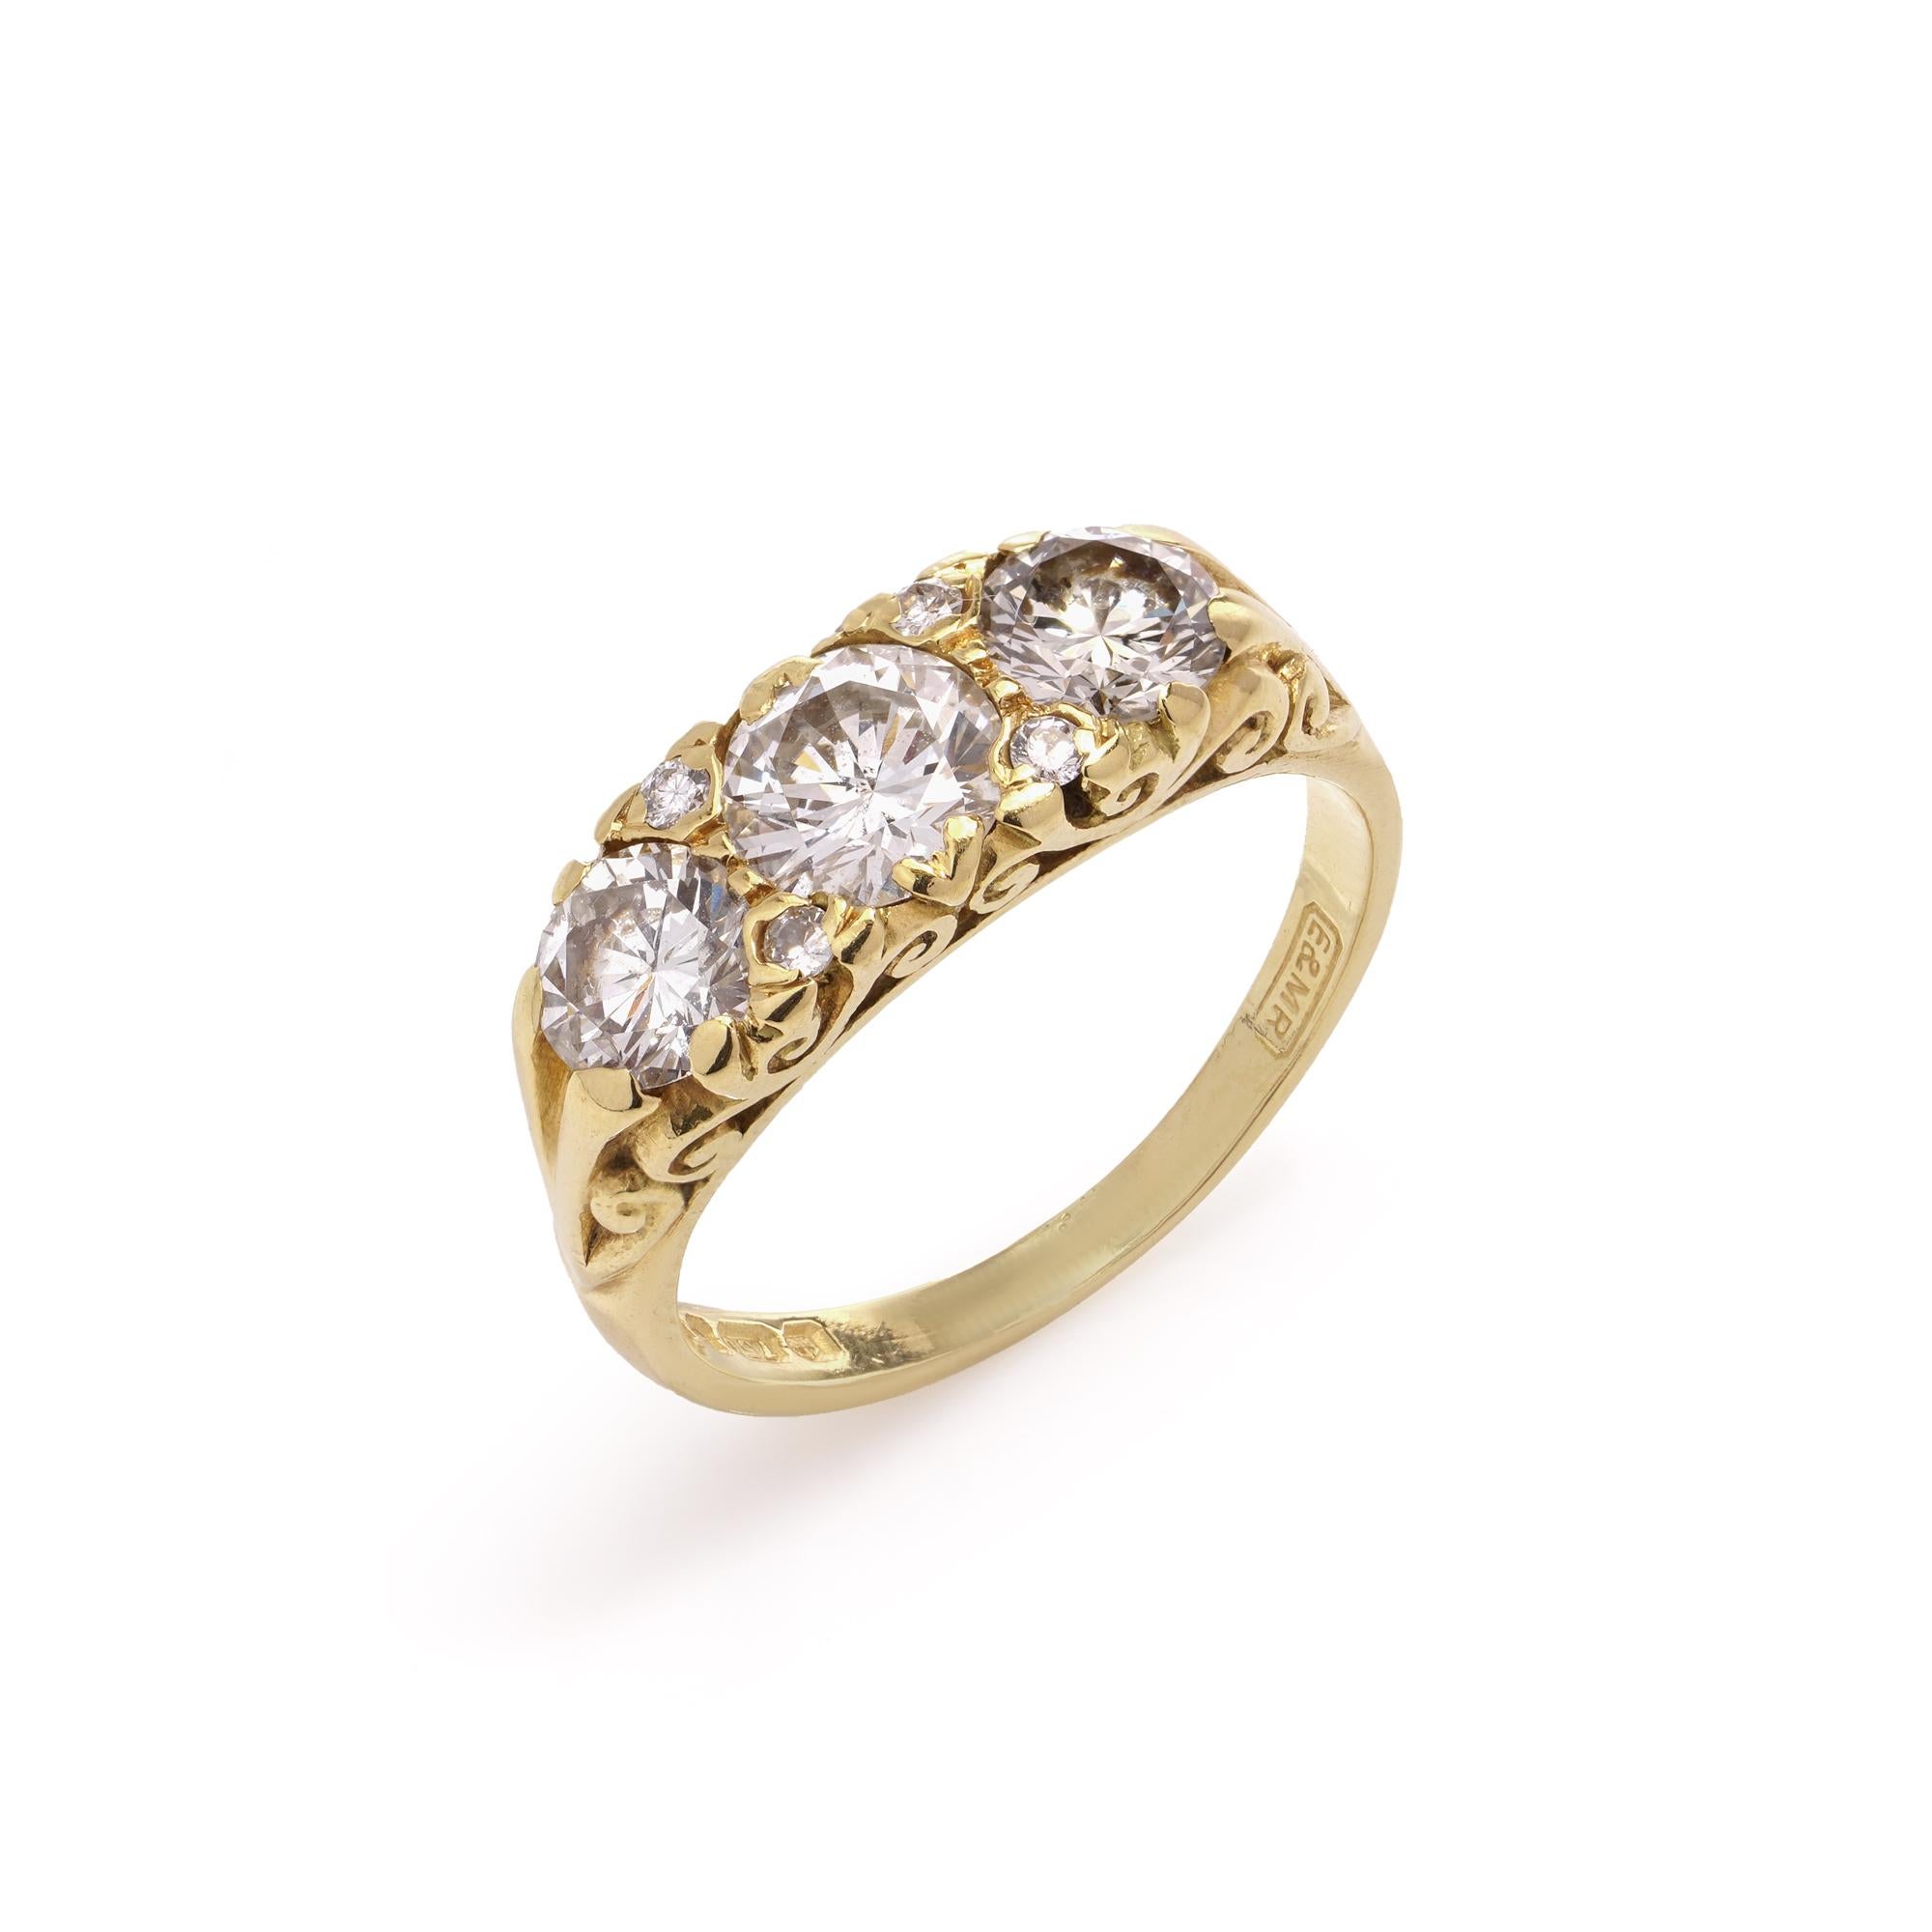 In homage to the elegant aesthetics of the Victorian era, this stunning ring is crafted in Victorian style of 18kt  yellow gold, exuding timeless sophistication. The central feature of this exquisite piece is a trio of dazzling diamonds, delicately